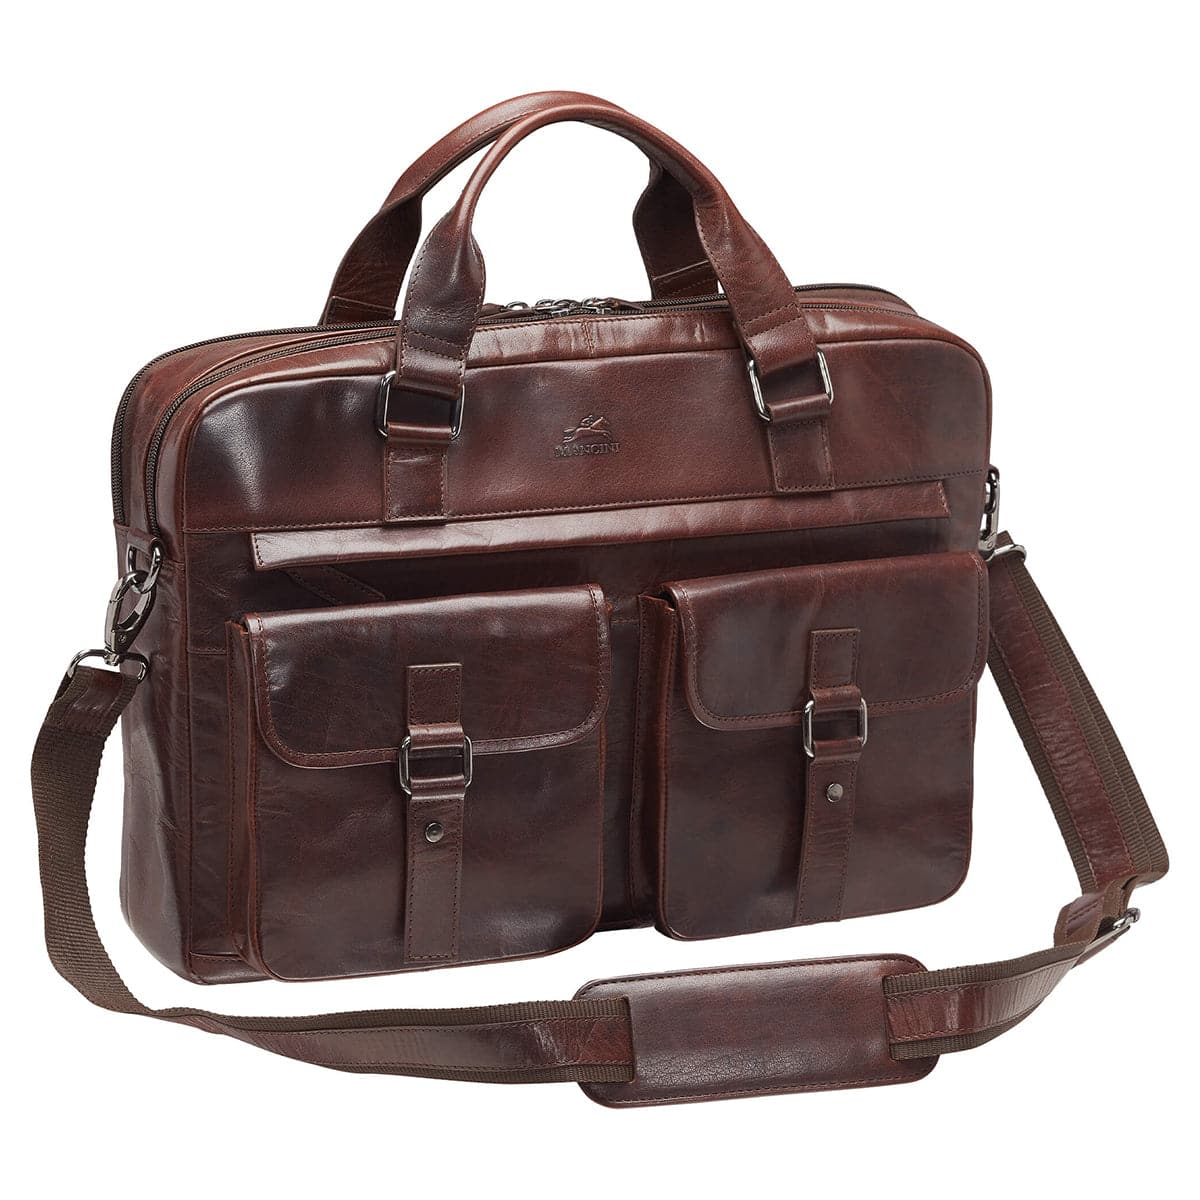 Mancini Buffalo Briefcase with Dual Compartments for 15.6" Laptop